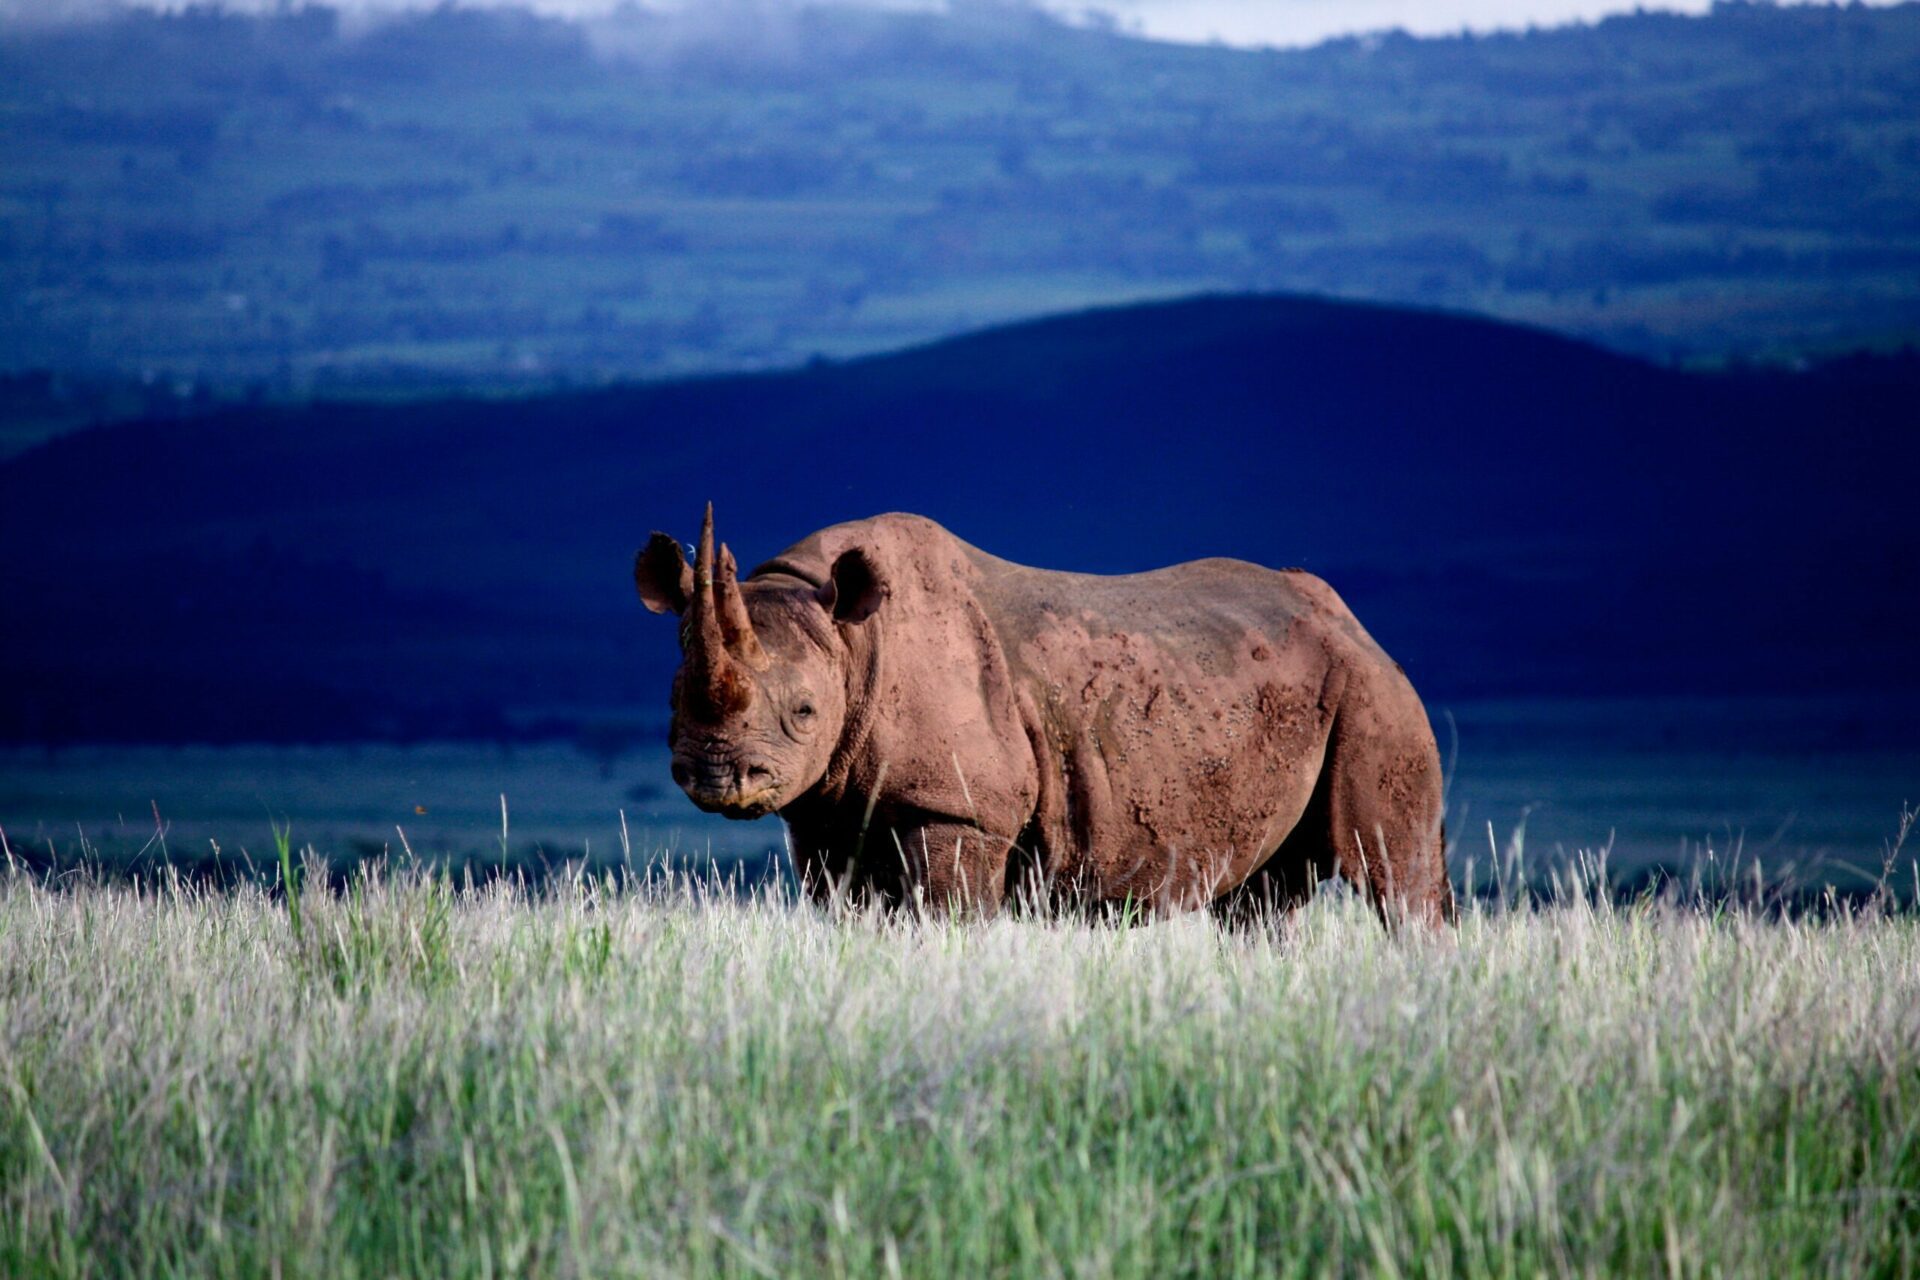 lone rhino in a field with blueish hills in the background